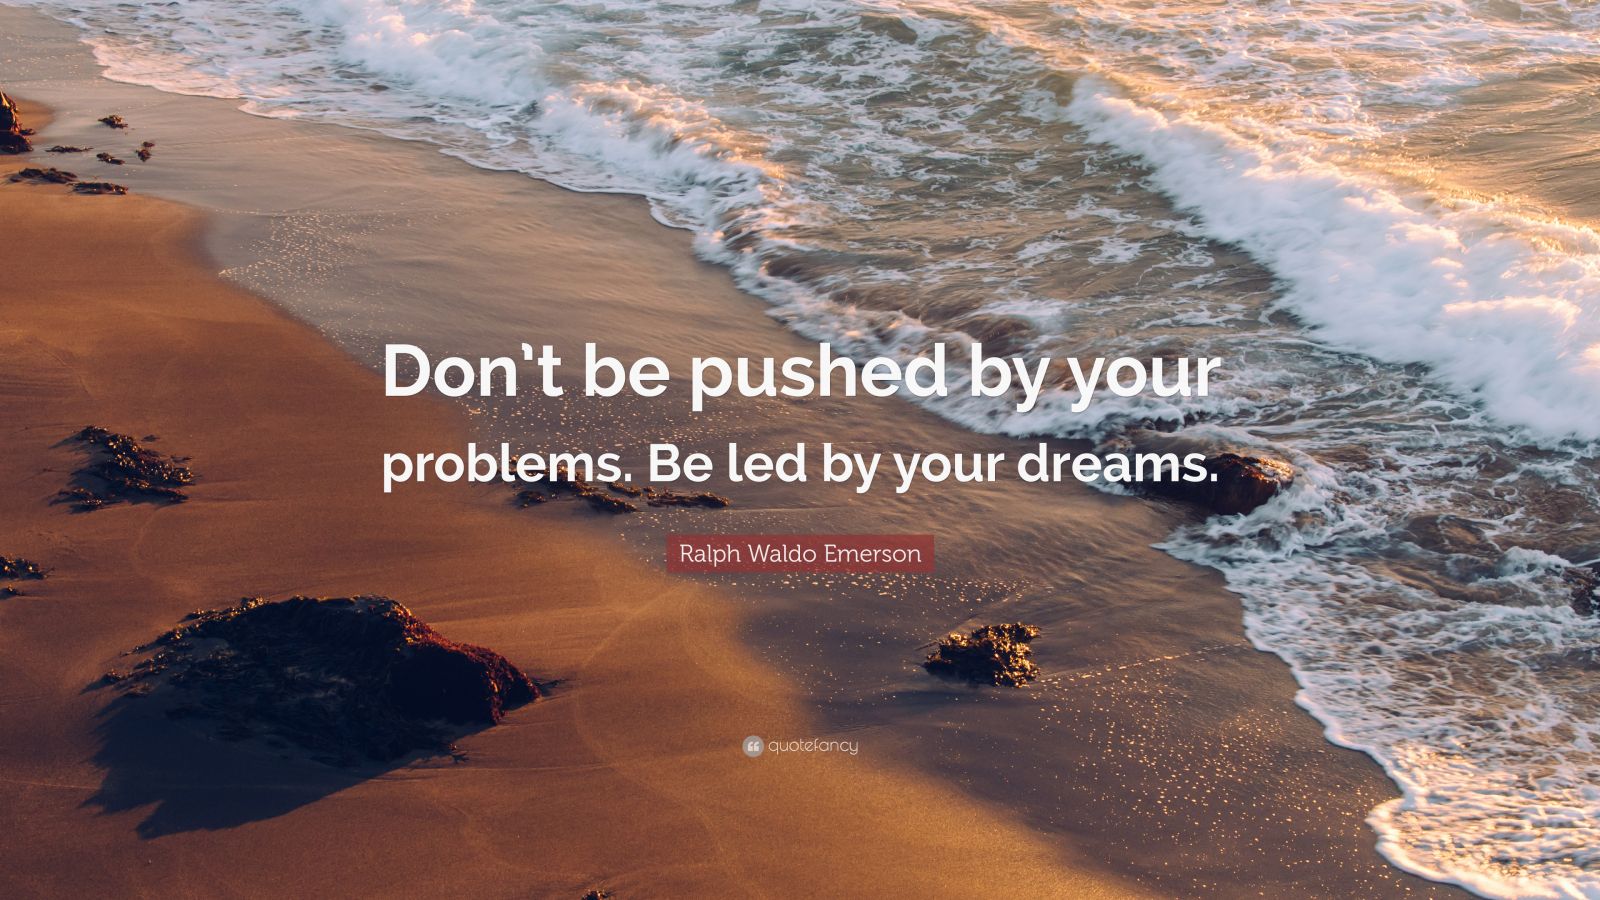 Ralph Waldo Emerson Quote: "Don't be pushed by your problems. Be led by your dreams." (12 ...